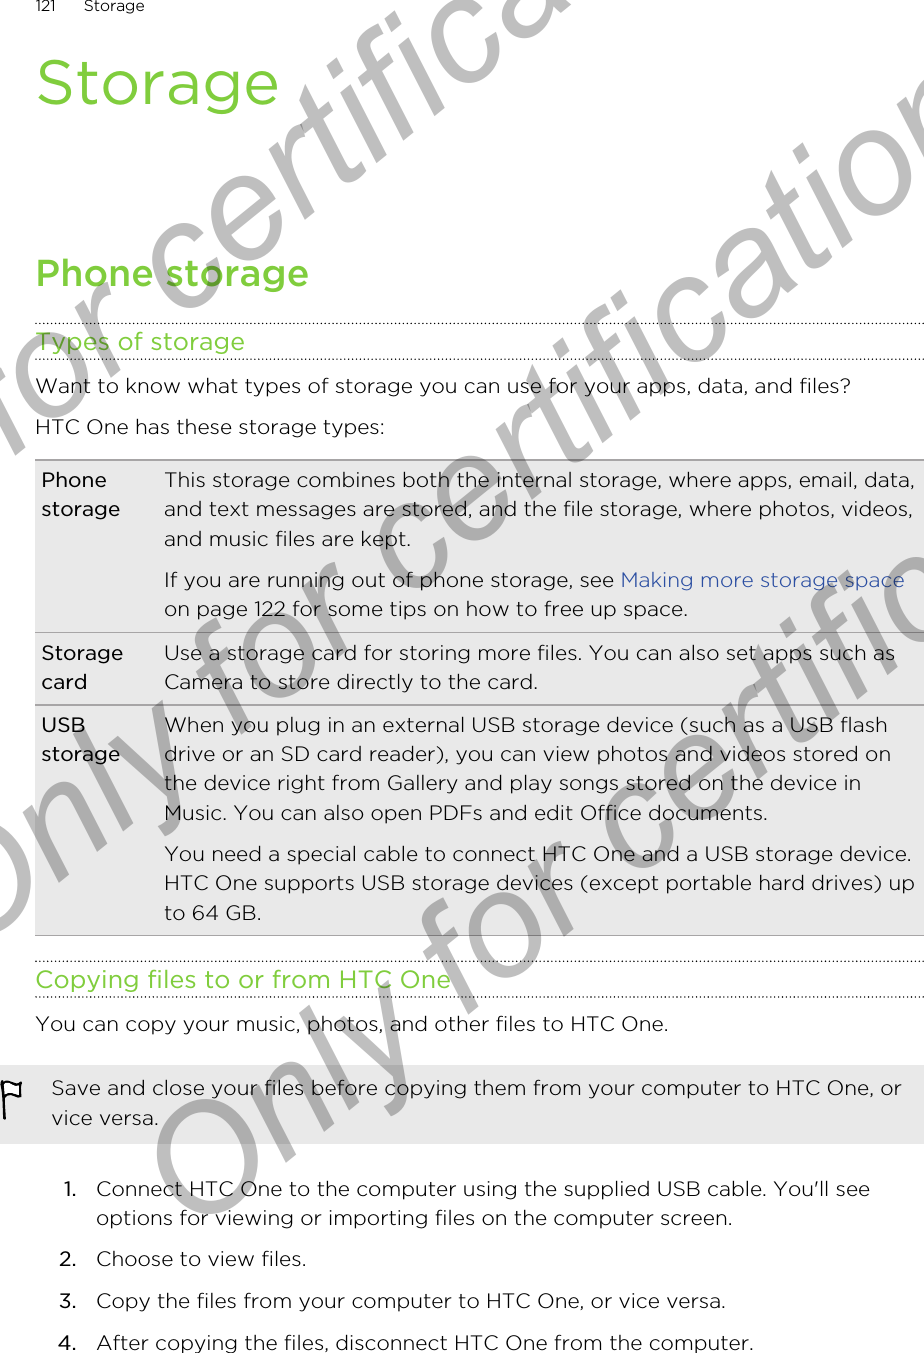 StoragePhone storageTypes of storageWant to know what types of storage you can use for your apps, data, and files?HTC One has these storage types:PhonestorageThis storage combines both the internal storage, where apps, email, data,and text messages are stored, and the file storage, where photos, videos,and music files are kept.If you are running out of phone storage, see Making more storage spaceon page 122 for some tips on how to free up space.StoragecardUse a storage card for storing more files. You can also set apps such asCamera to store directly to the card.USBstorageWhen you plug in an external USB storage device (such as a USB flashdrive or an SD card reader), you can view photos and videos stored onthe device right from Gallery and play songs stored on the device inMusic. You can also open PDFs and edit Office documents.You need a special cable to connect HTC One and a USB storage device.HTC One supports USB storage devices (except portable hard drives) upto 64 GB.Copying files to or from HTC OneYou can copy your music, photos, and other files to HTC One.Save and close your files before copying them from your computer to HTC One, orvice versa.1. Connect HTC One to the computer using the supplied USB cable. You&apos;ll seeoptions for viewing or importing files on the computer screen.2. Choose to view files.3. Copy the files from your computer to HTC One, or vice versa.4. After copying the files, disconnect HTC One from the computer.121 StorageOnly for certification  Only for certification  Only for certification